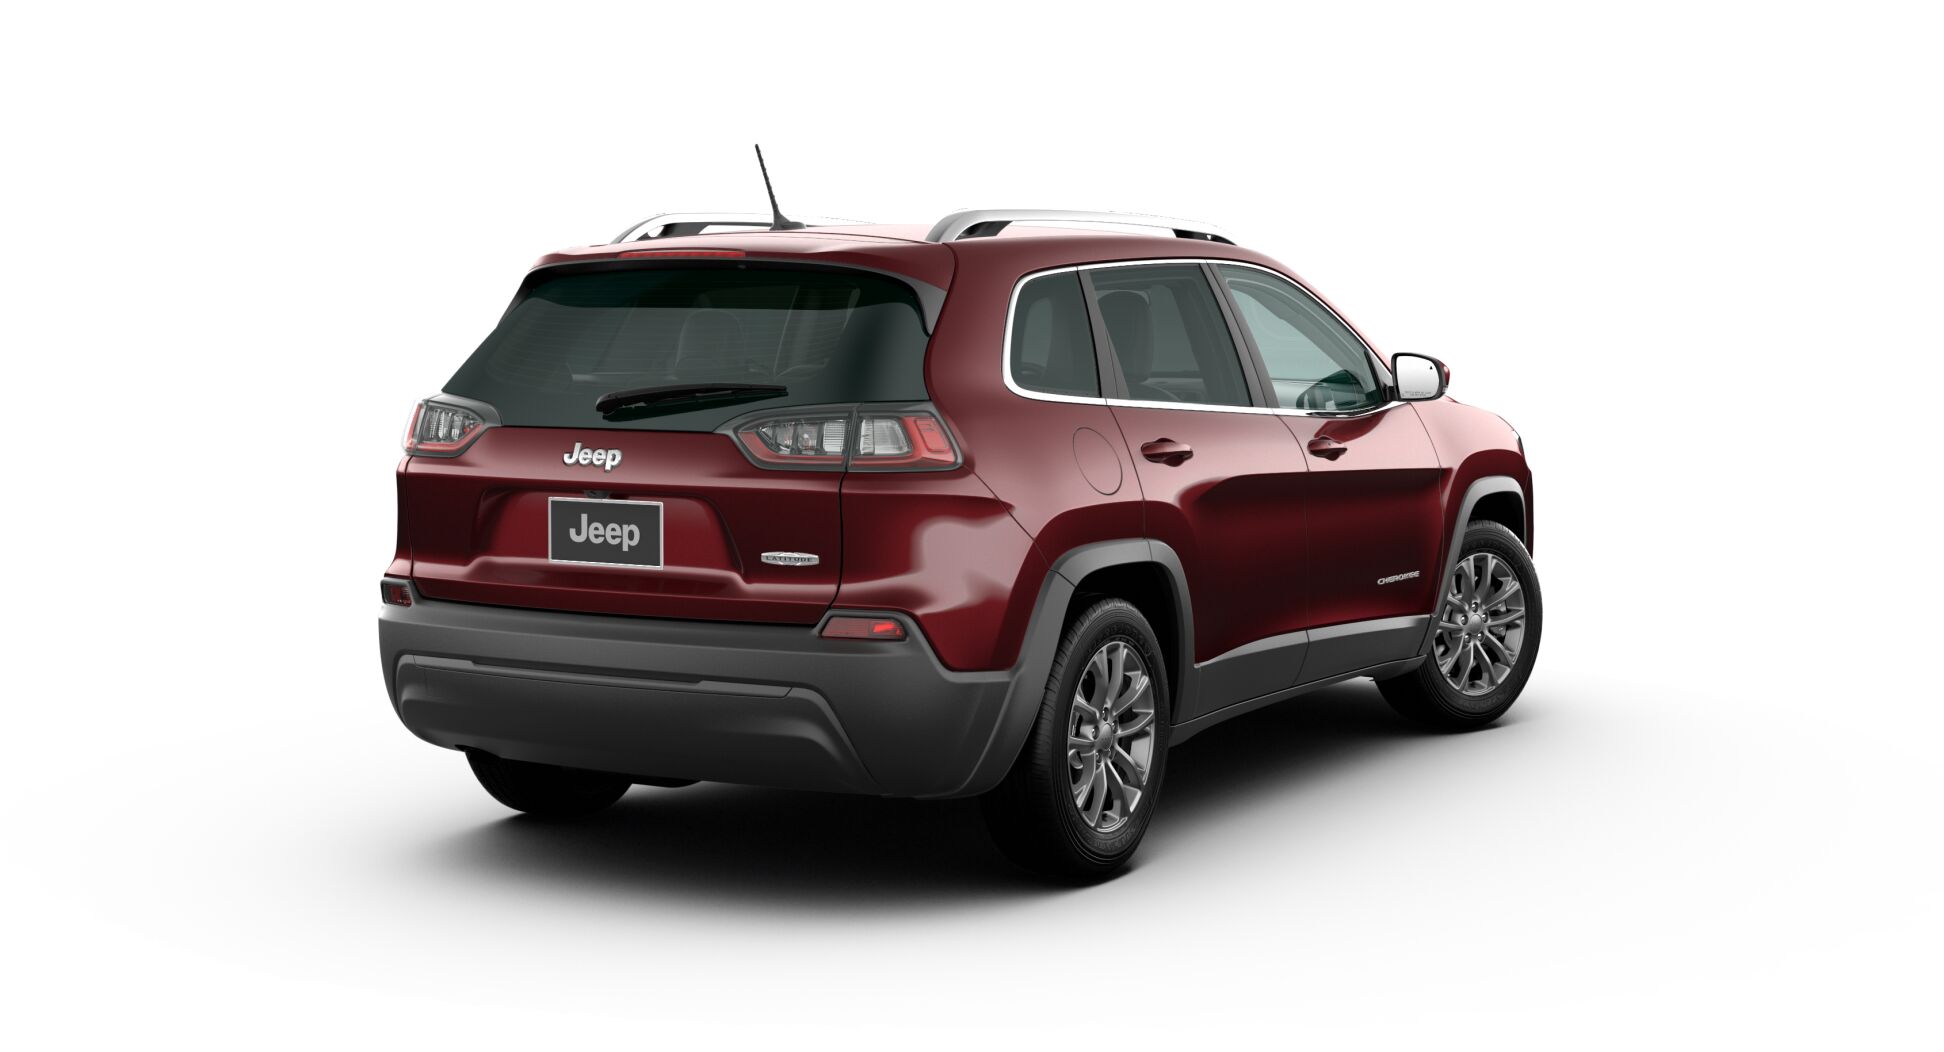 2020 Jeep Cherokee Latitude Plus Rear Red Exterior Picture.jfif